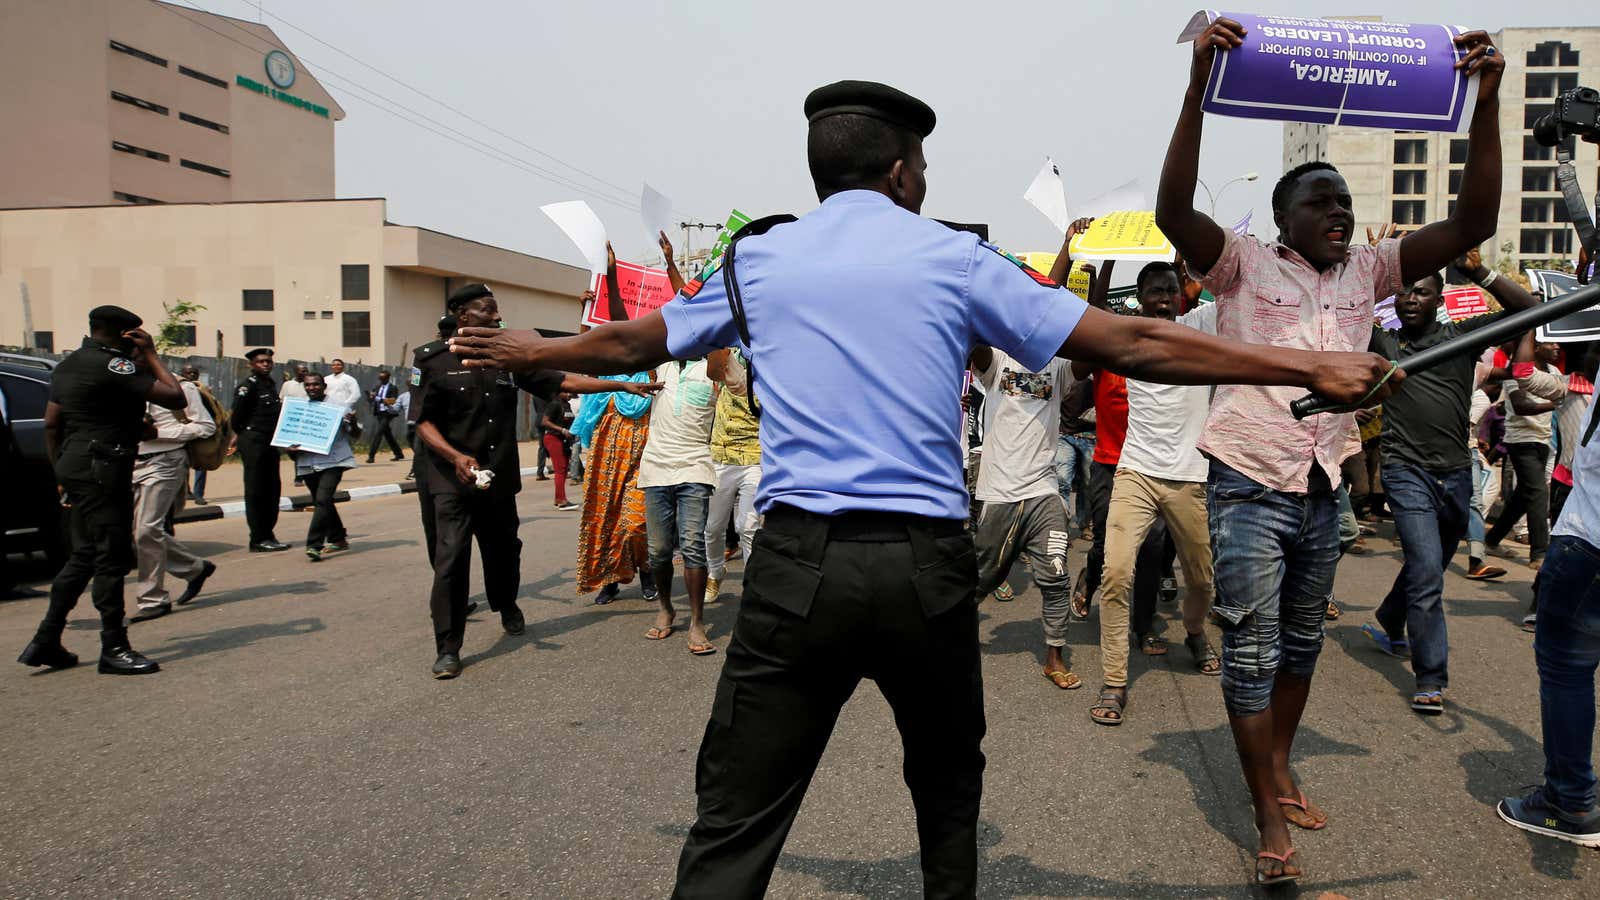 Tough times for the Nigerian police’s image